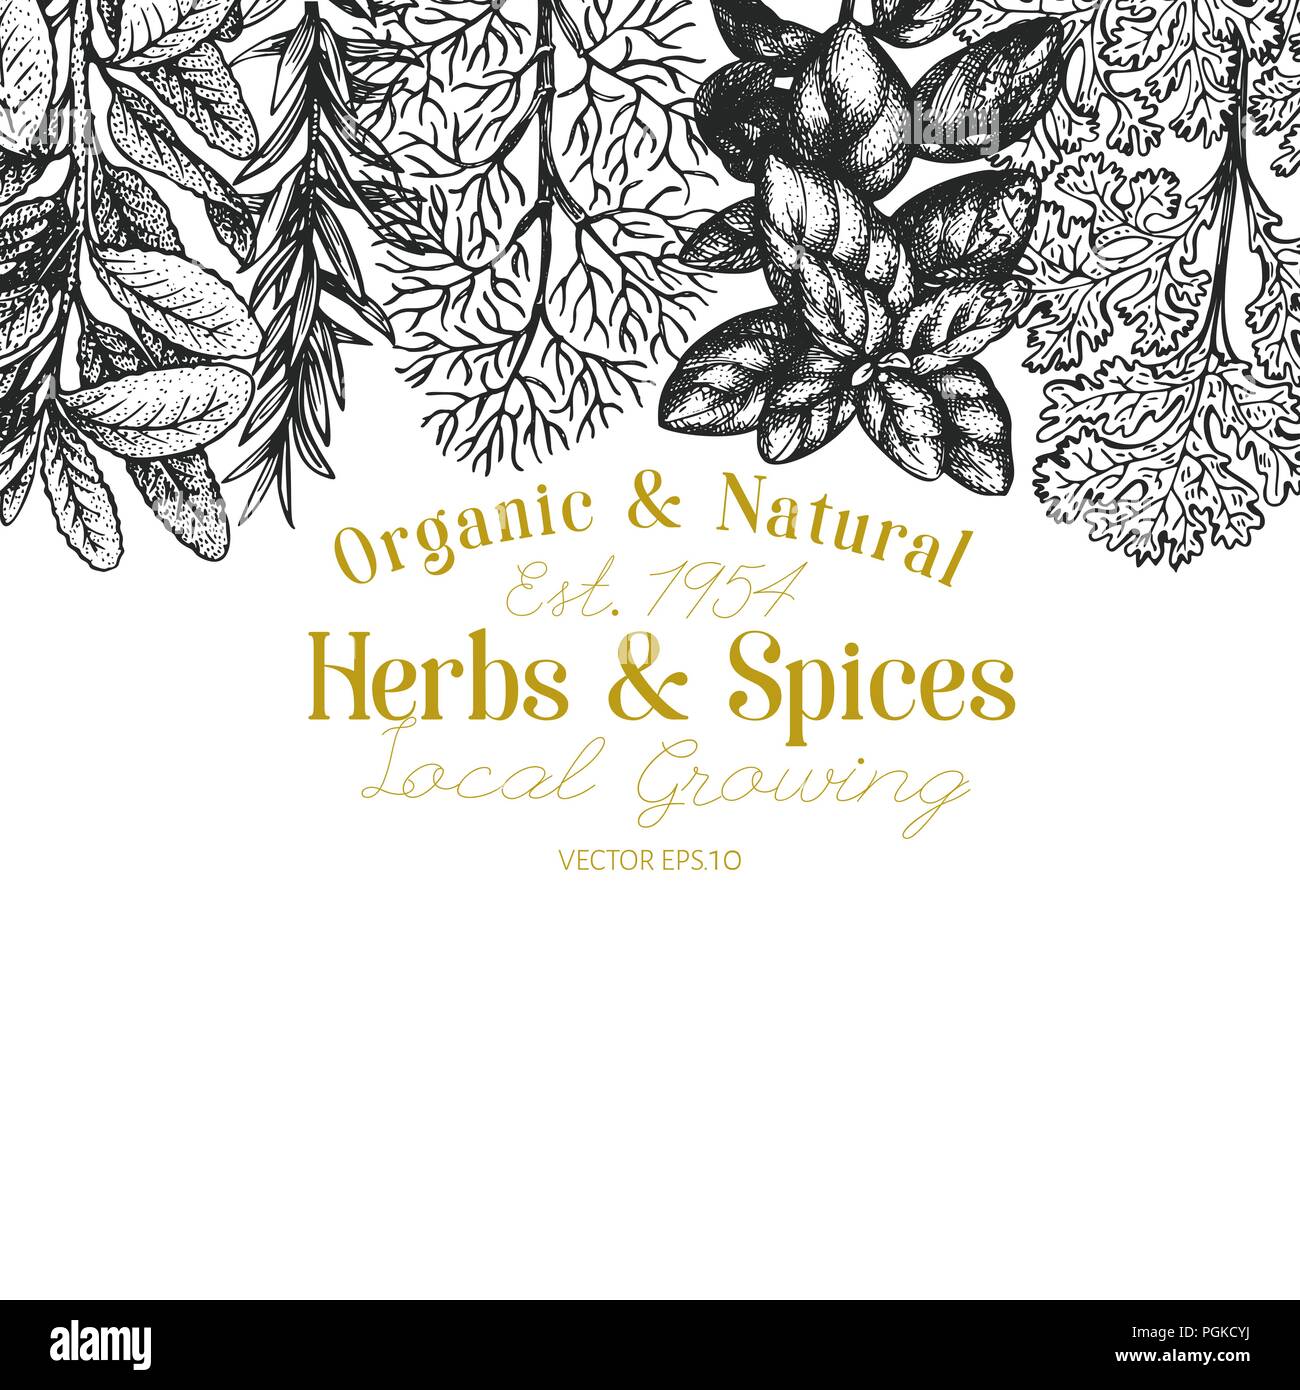 Culinary herbs and spices banner template. Vector background for design menu, packaging, recipes, label, farm market products. Hand drawn retro botani Stock Vector